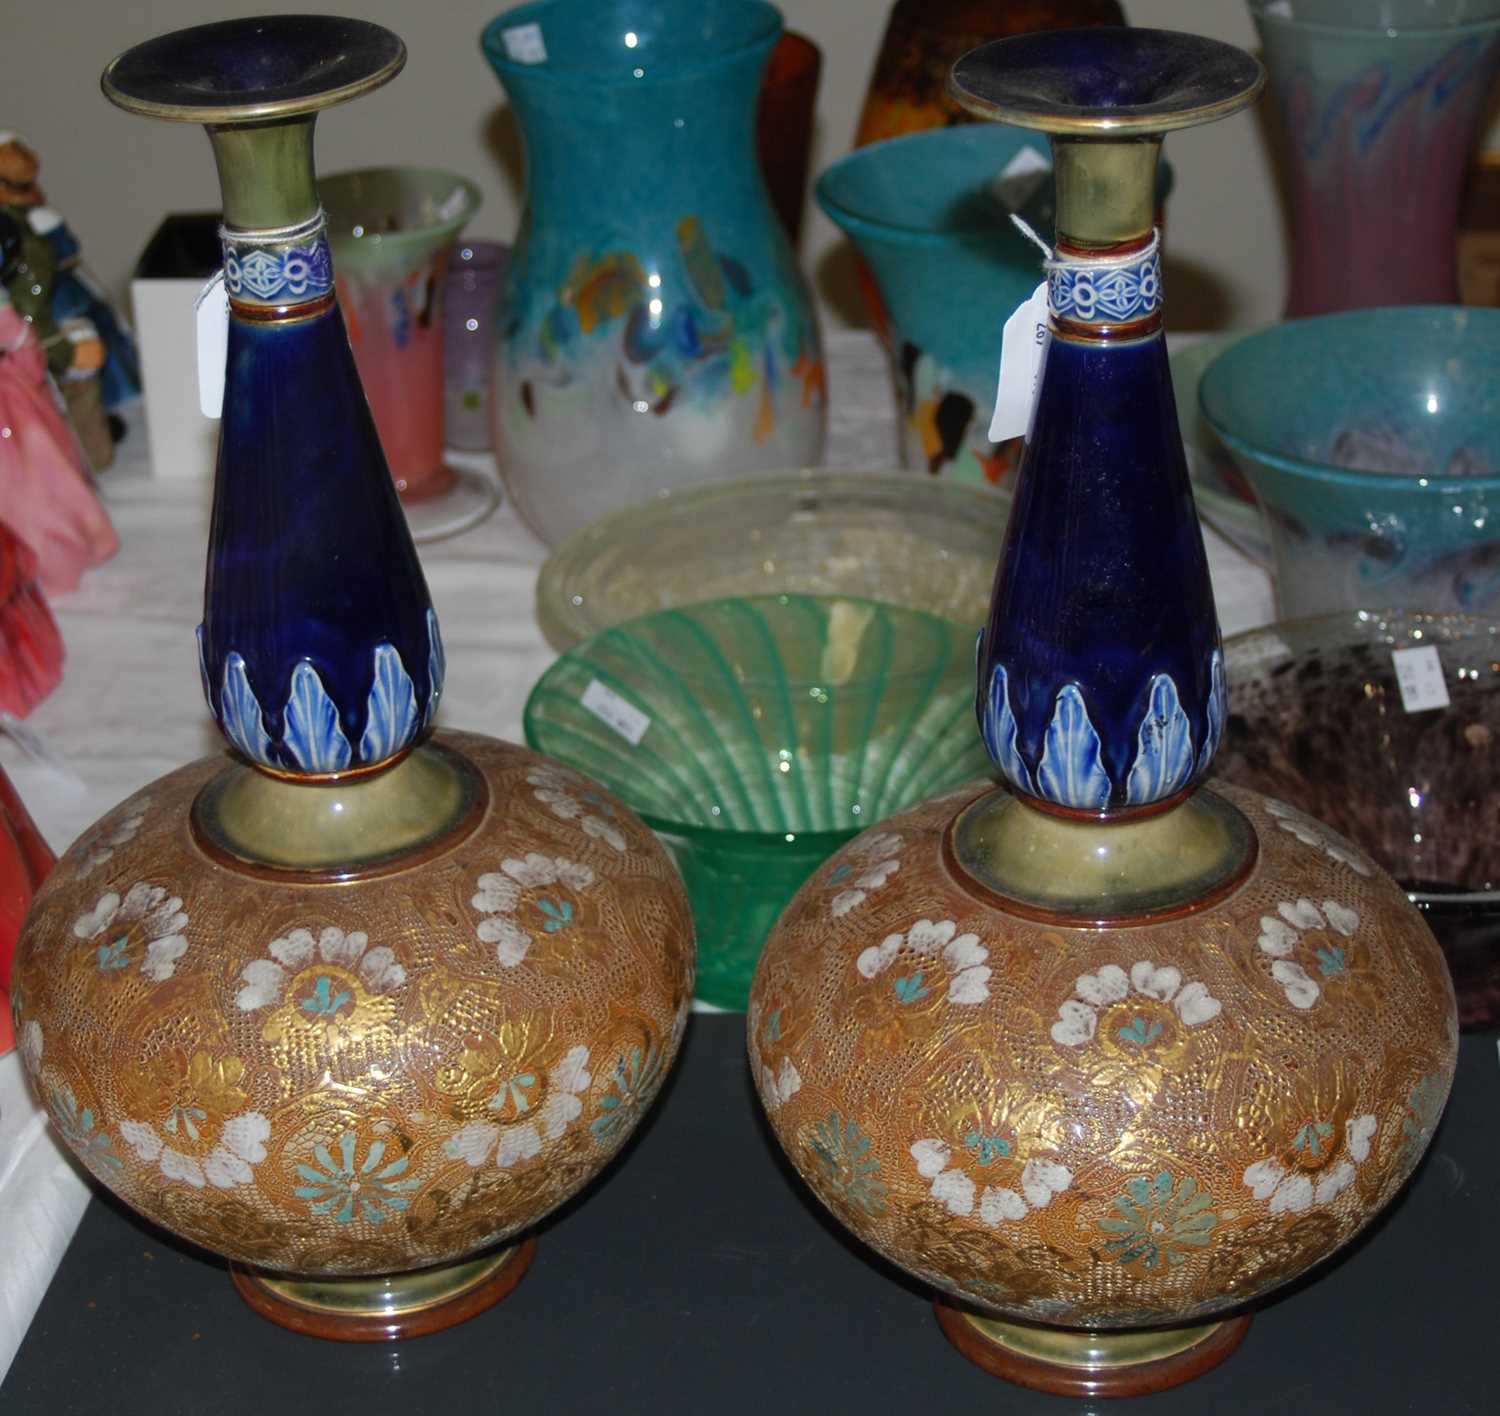 A pair of early 20th century Doulton Lambeth Art Nouveau bottle vases, the underside with Doulton